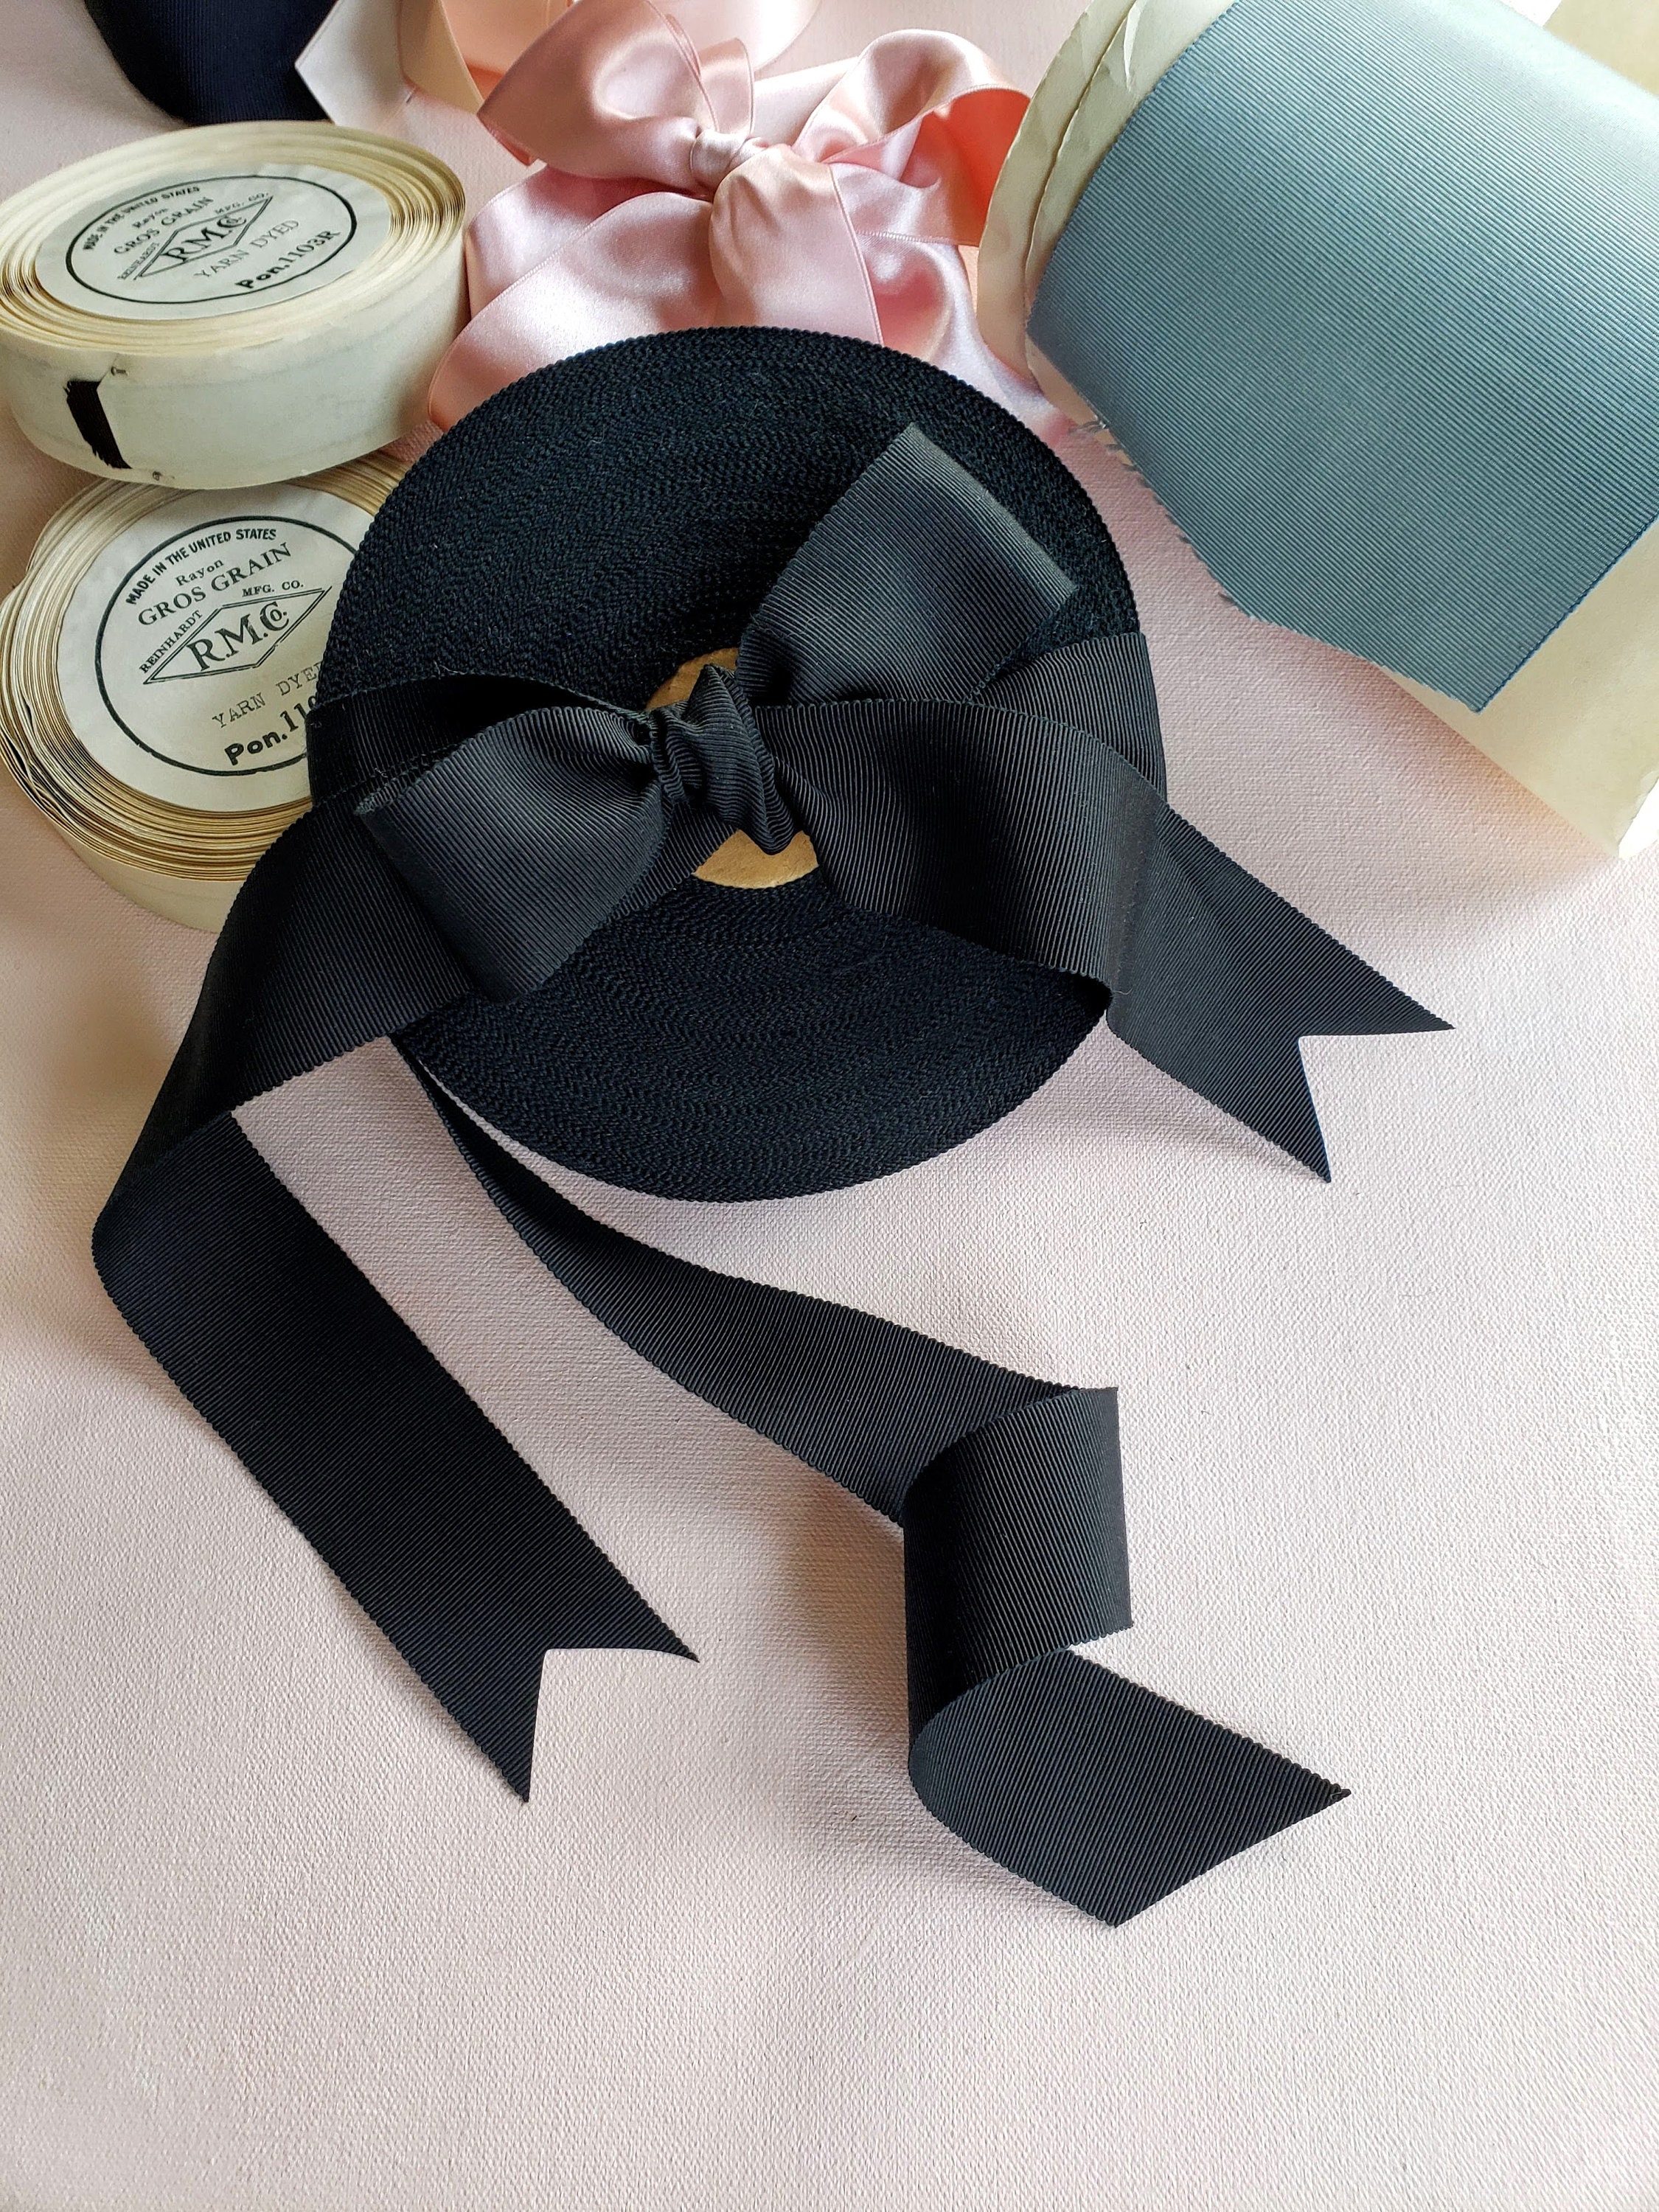  Maclemon 3/8 Inch x 100yds Black Grosgrain Ribbon Black Ribbon  for Gift Wrapping Very Suitable for Weddings Decoration Bouquet Arts Craft  Sewing Hair Bow Invitation